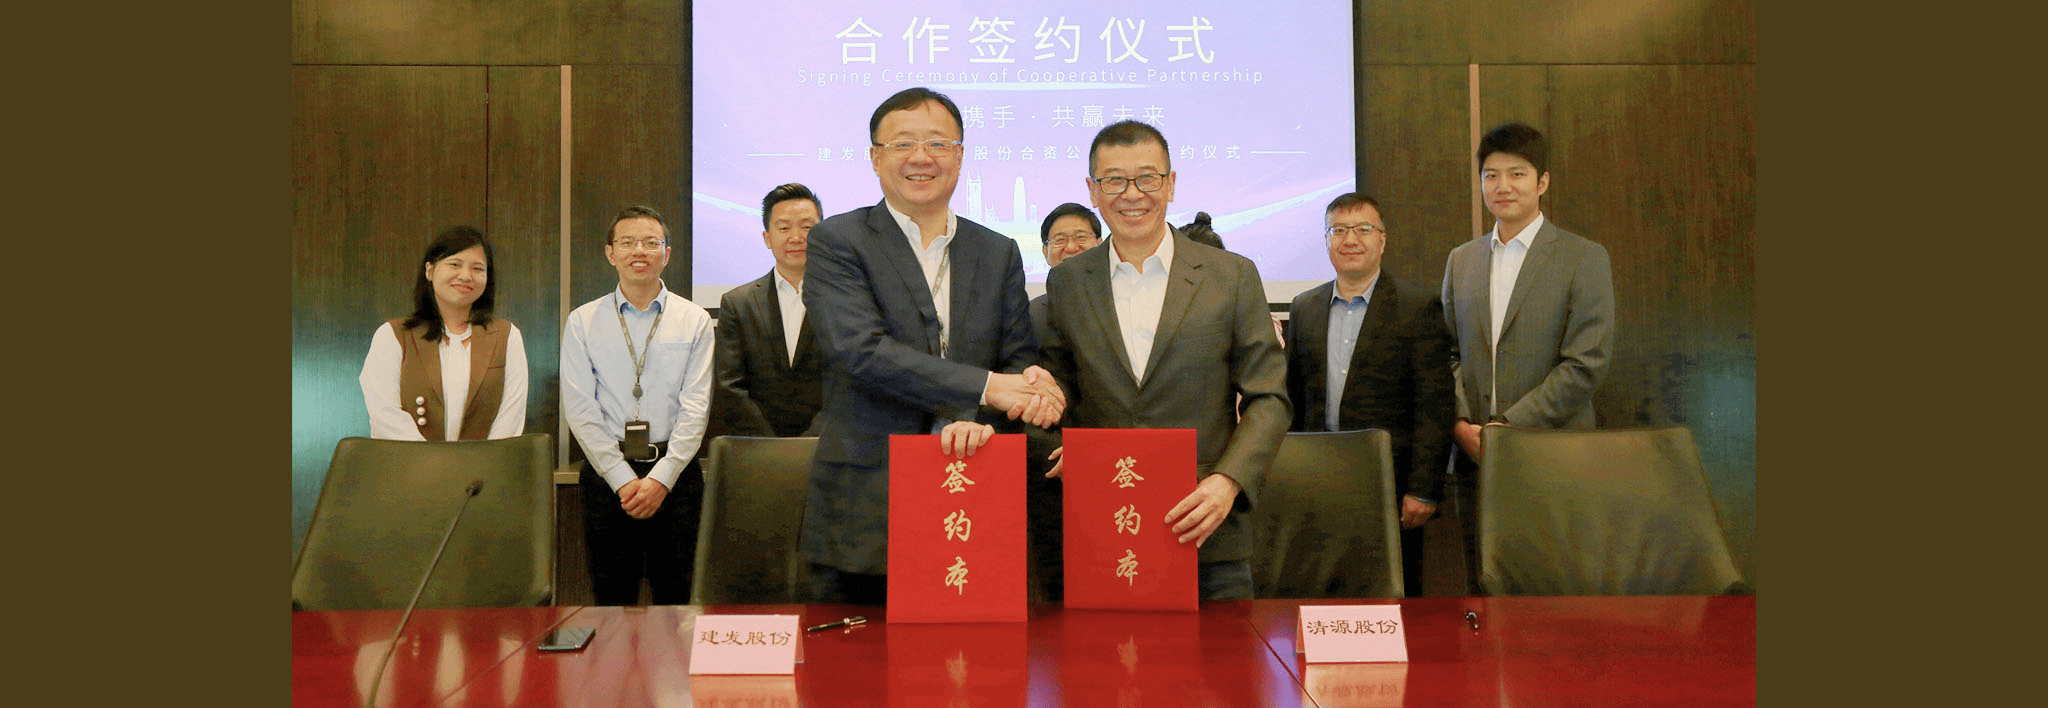 Joint Venture Agreement between Clenergy and C&D INC - Signing Ceremony